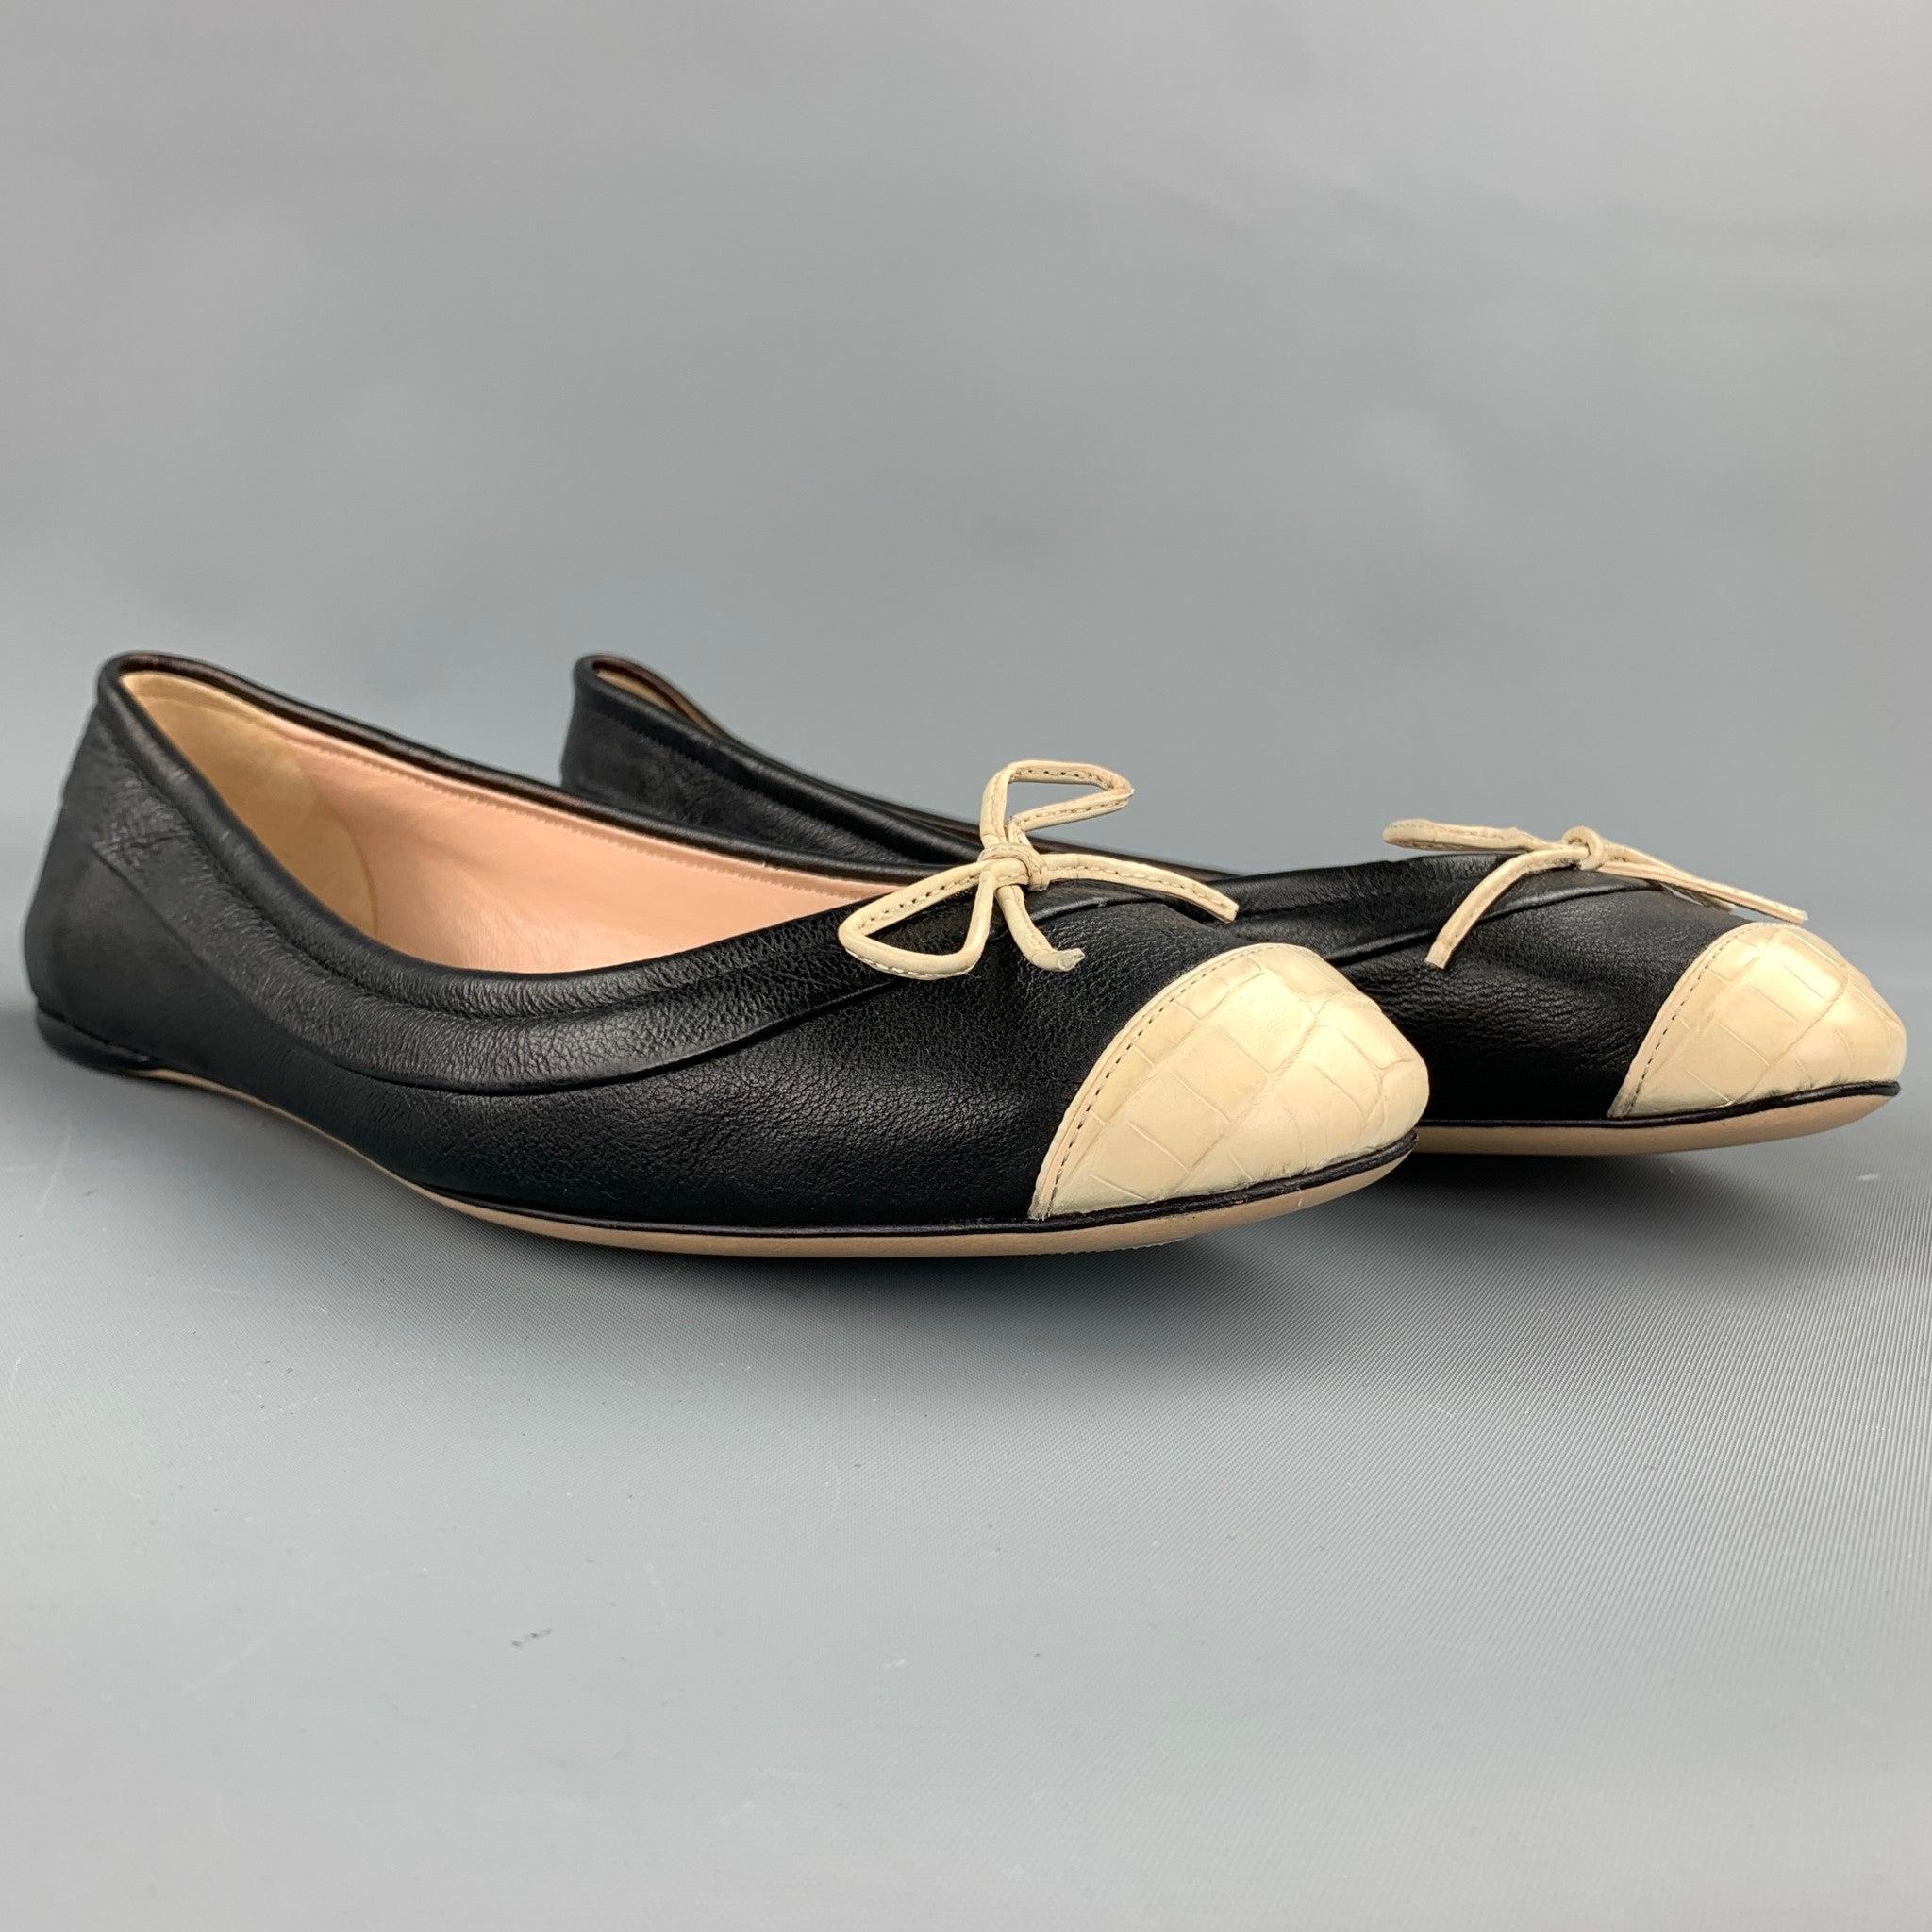 REED KRAKOFF Size 7.5 Black & Beige Two Tone Leather Cap Toe Flats In Good Condition For Sale In San Francisco, CA